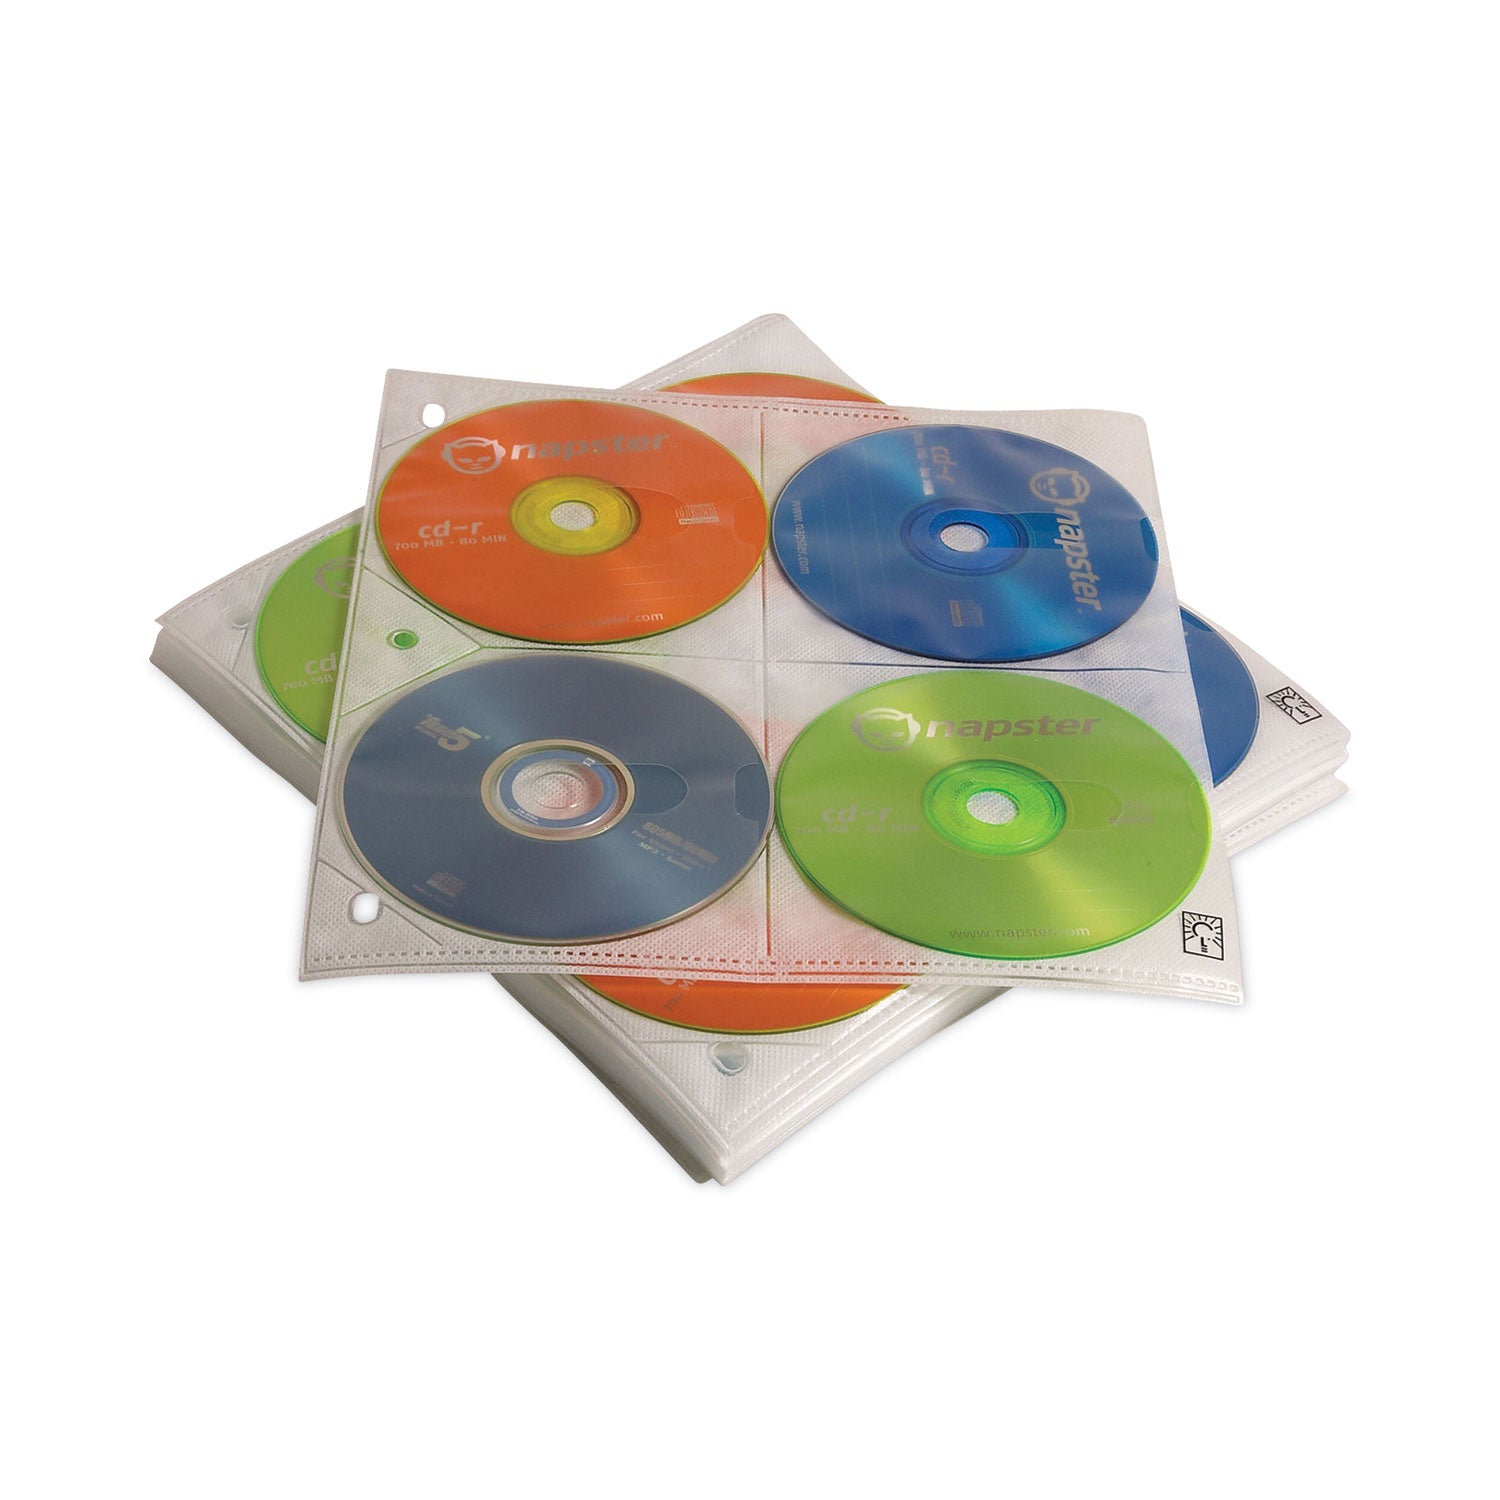 two-sided-cd-storage-sleeves-for-ring-binder-8-disc-capacity-clear-25-sleeves_clg3200366 - 1